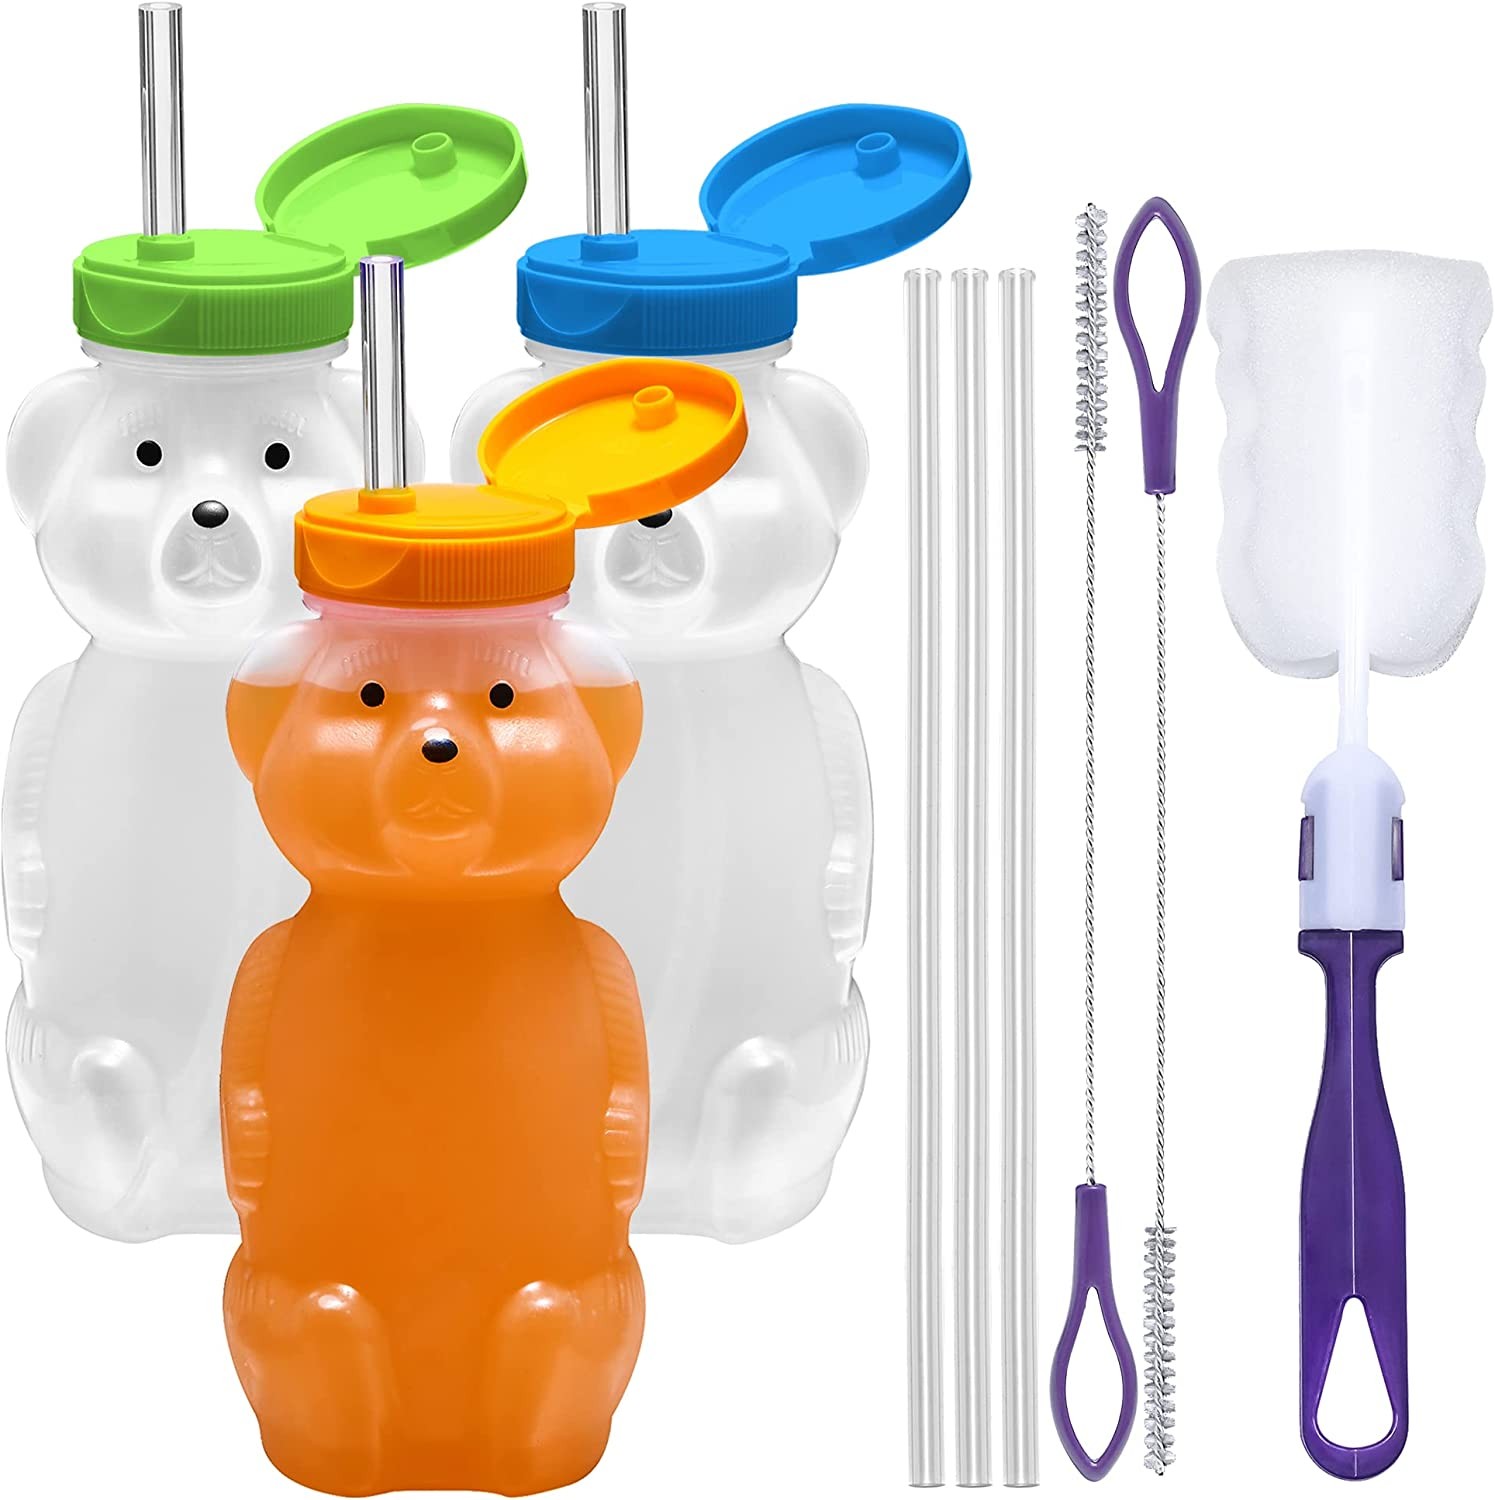 3-pack Juice Bear Bottle Drinking Cup with Long Straws (8 Ounces)